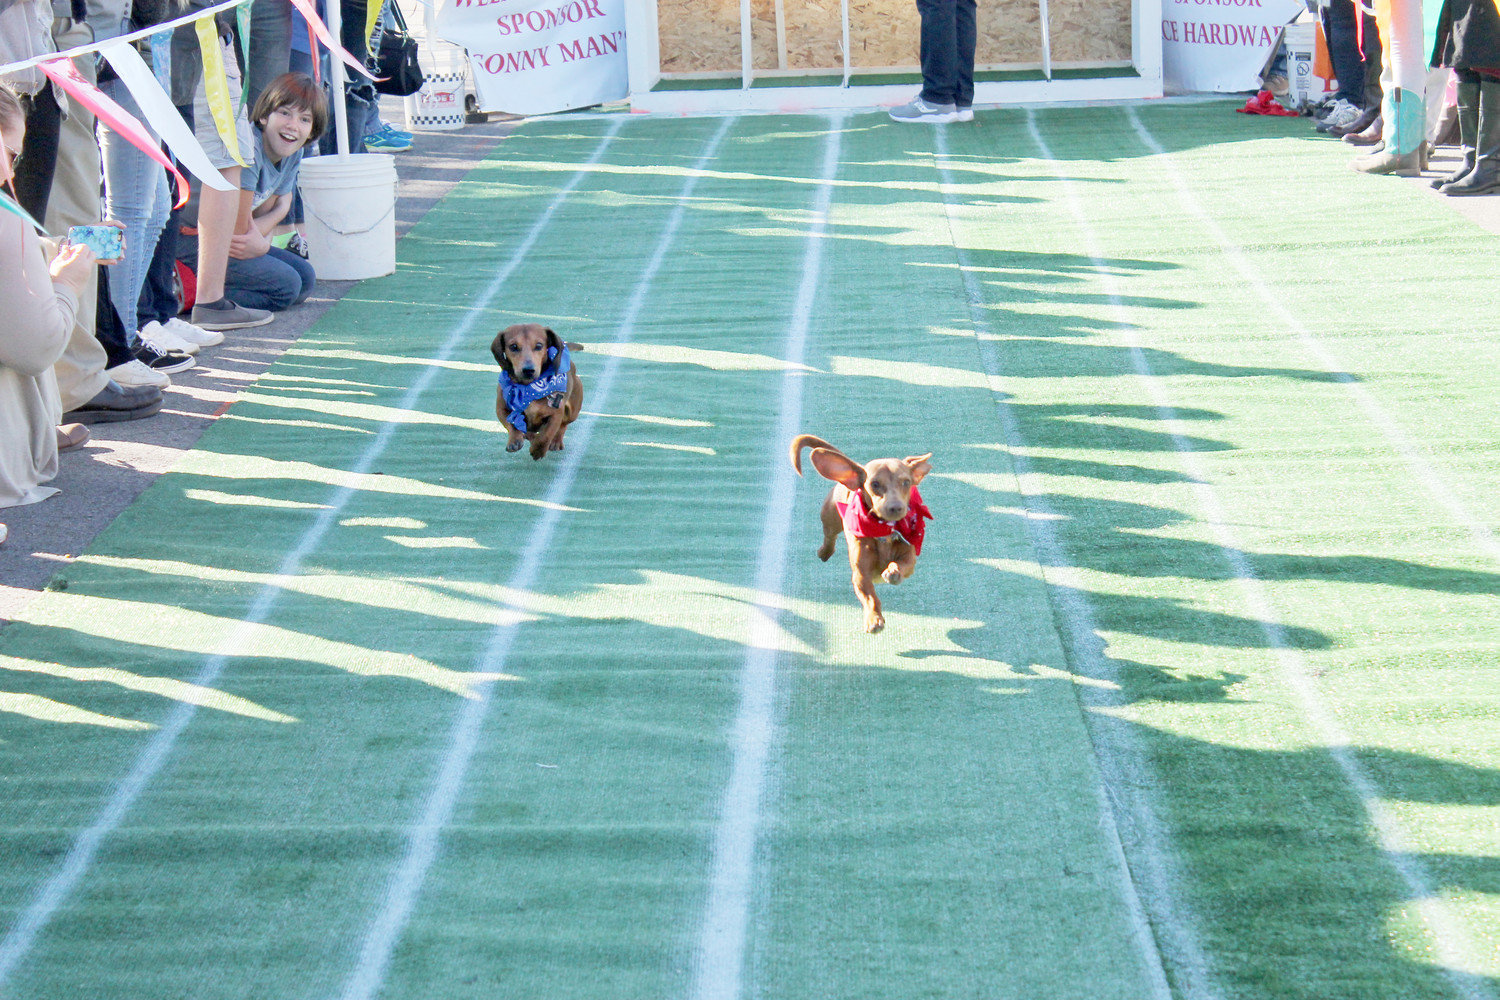 Onlookers cheer as weenie dogs blaze along the track during last year’s Iron Horse Festival Weenie Dog Race. (Monitor file photo).